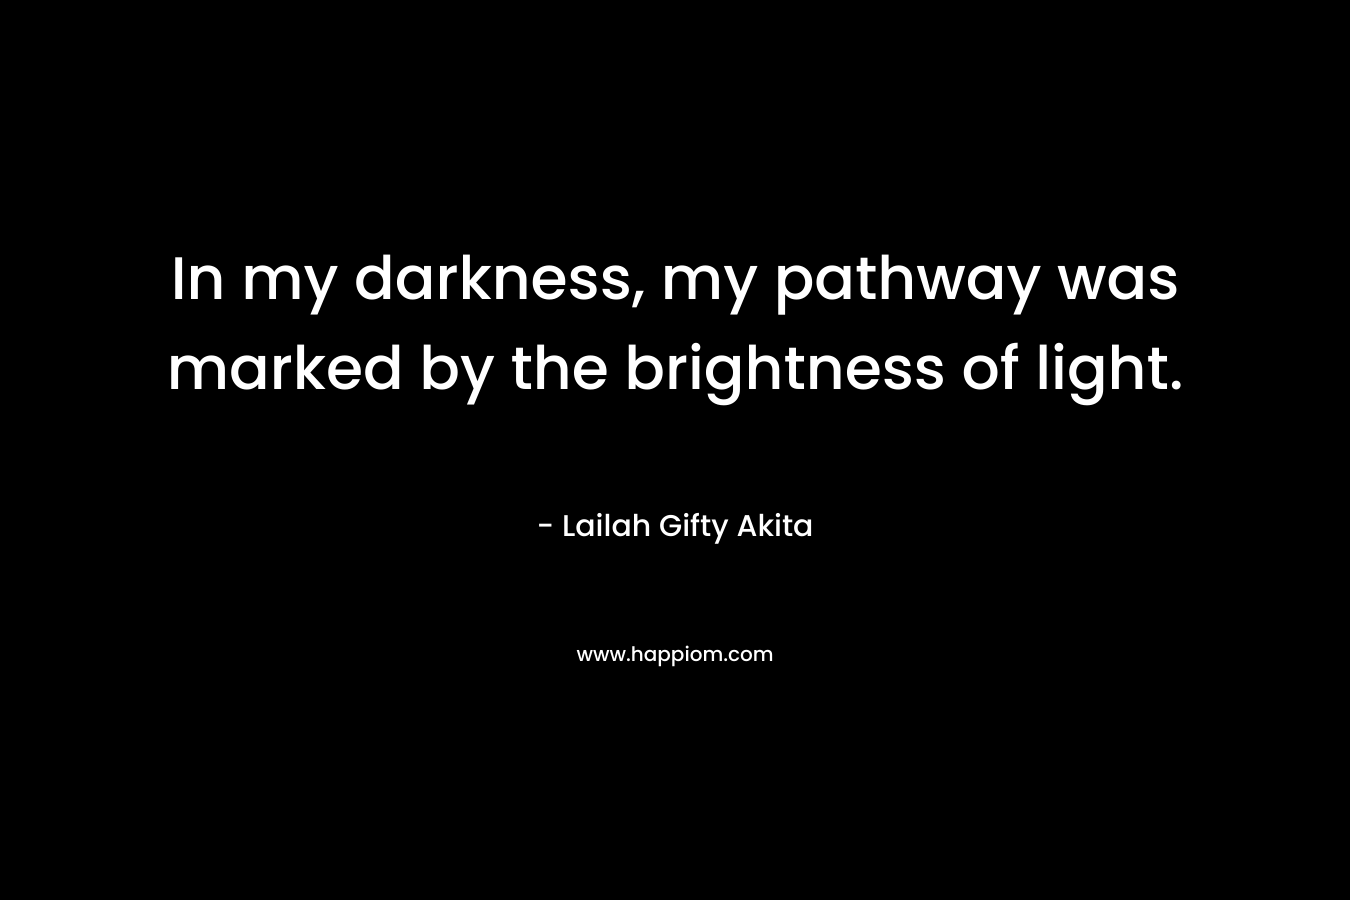 In my darkness, my pathway was marked by the brightness of light. – Lailah Gifty Akita